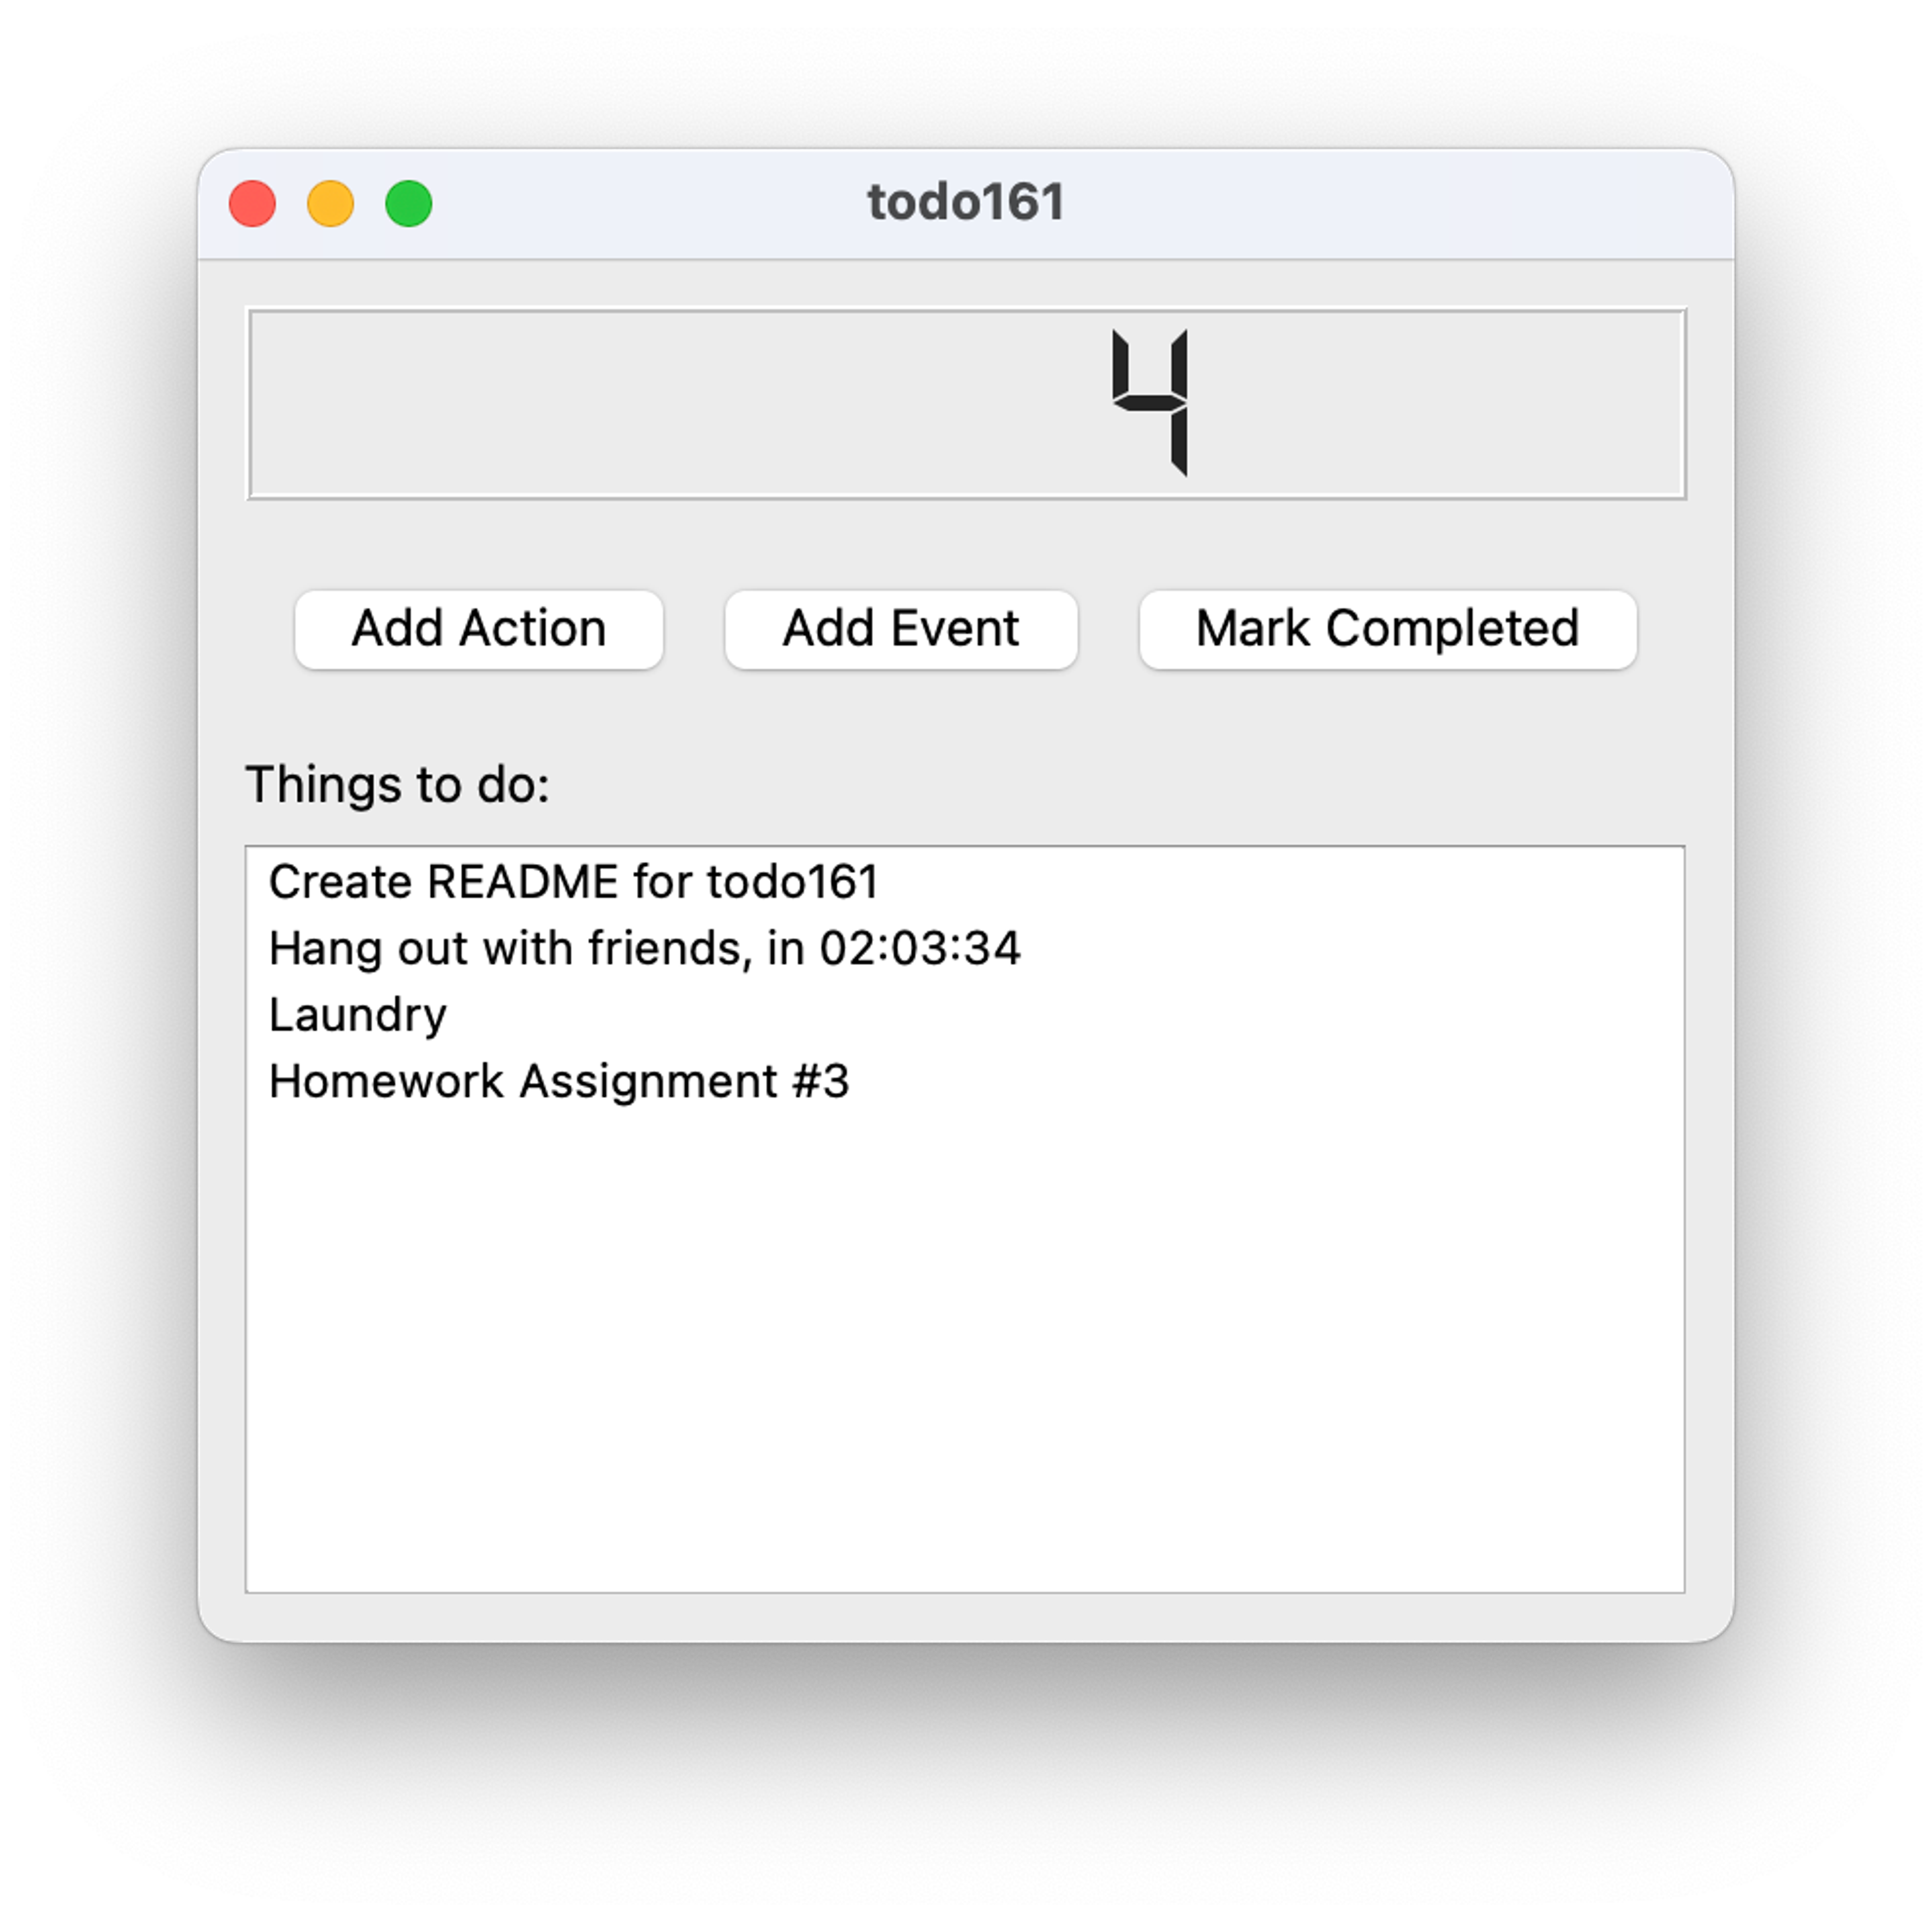 A screenshot of the todo161 app. From top to bottom: there is a huge number "4" in an LCD-style font, three buttons, and a list of tasks. The buttons are labeled "Add Action", "Add Event", and "Mark Completed". Beneath the buttons, there is a label "Things to do:" and a list of tasks. The list of tasks reads "Create README for todo161," "Hang out with friends, in 02:03:34" indicating a countdown, "Laundry," and "Homework Assignment #3."